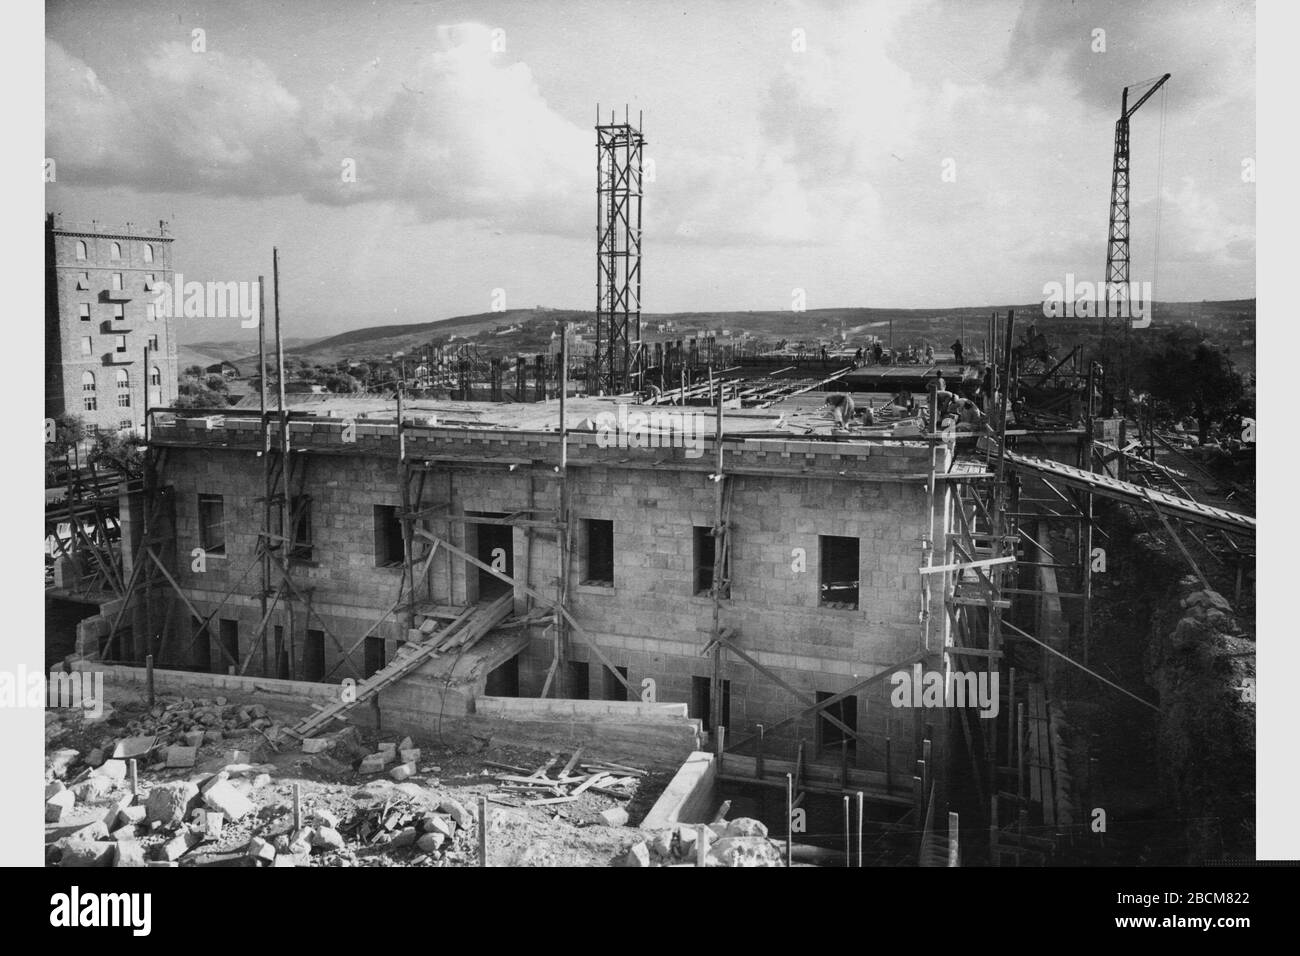 English The Y M C A Building In Jerusalem During Construction E O I I C U E O U E E O O E O O U O U Ss E E O I C U O U 11 November 1930 This Is Available From National Photo Collection Of Israel